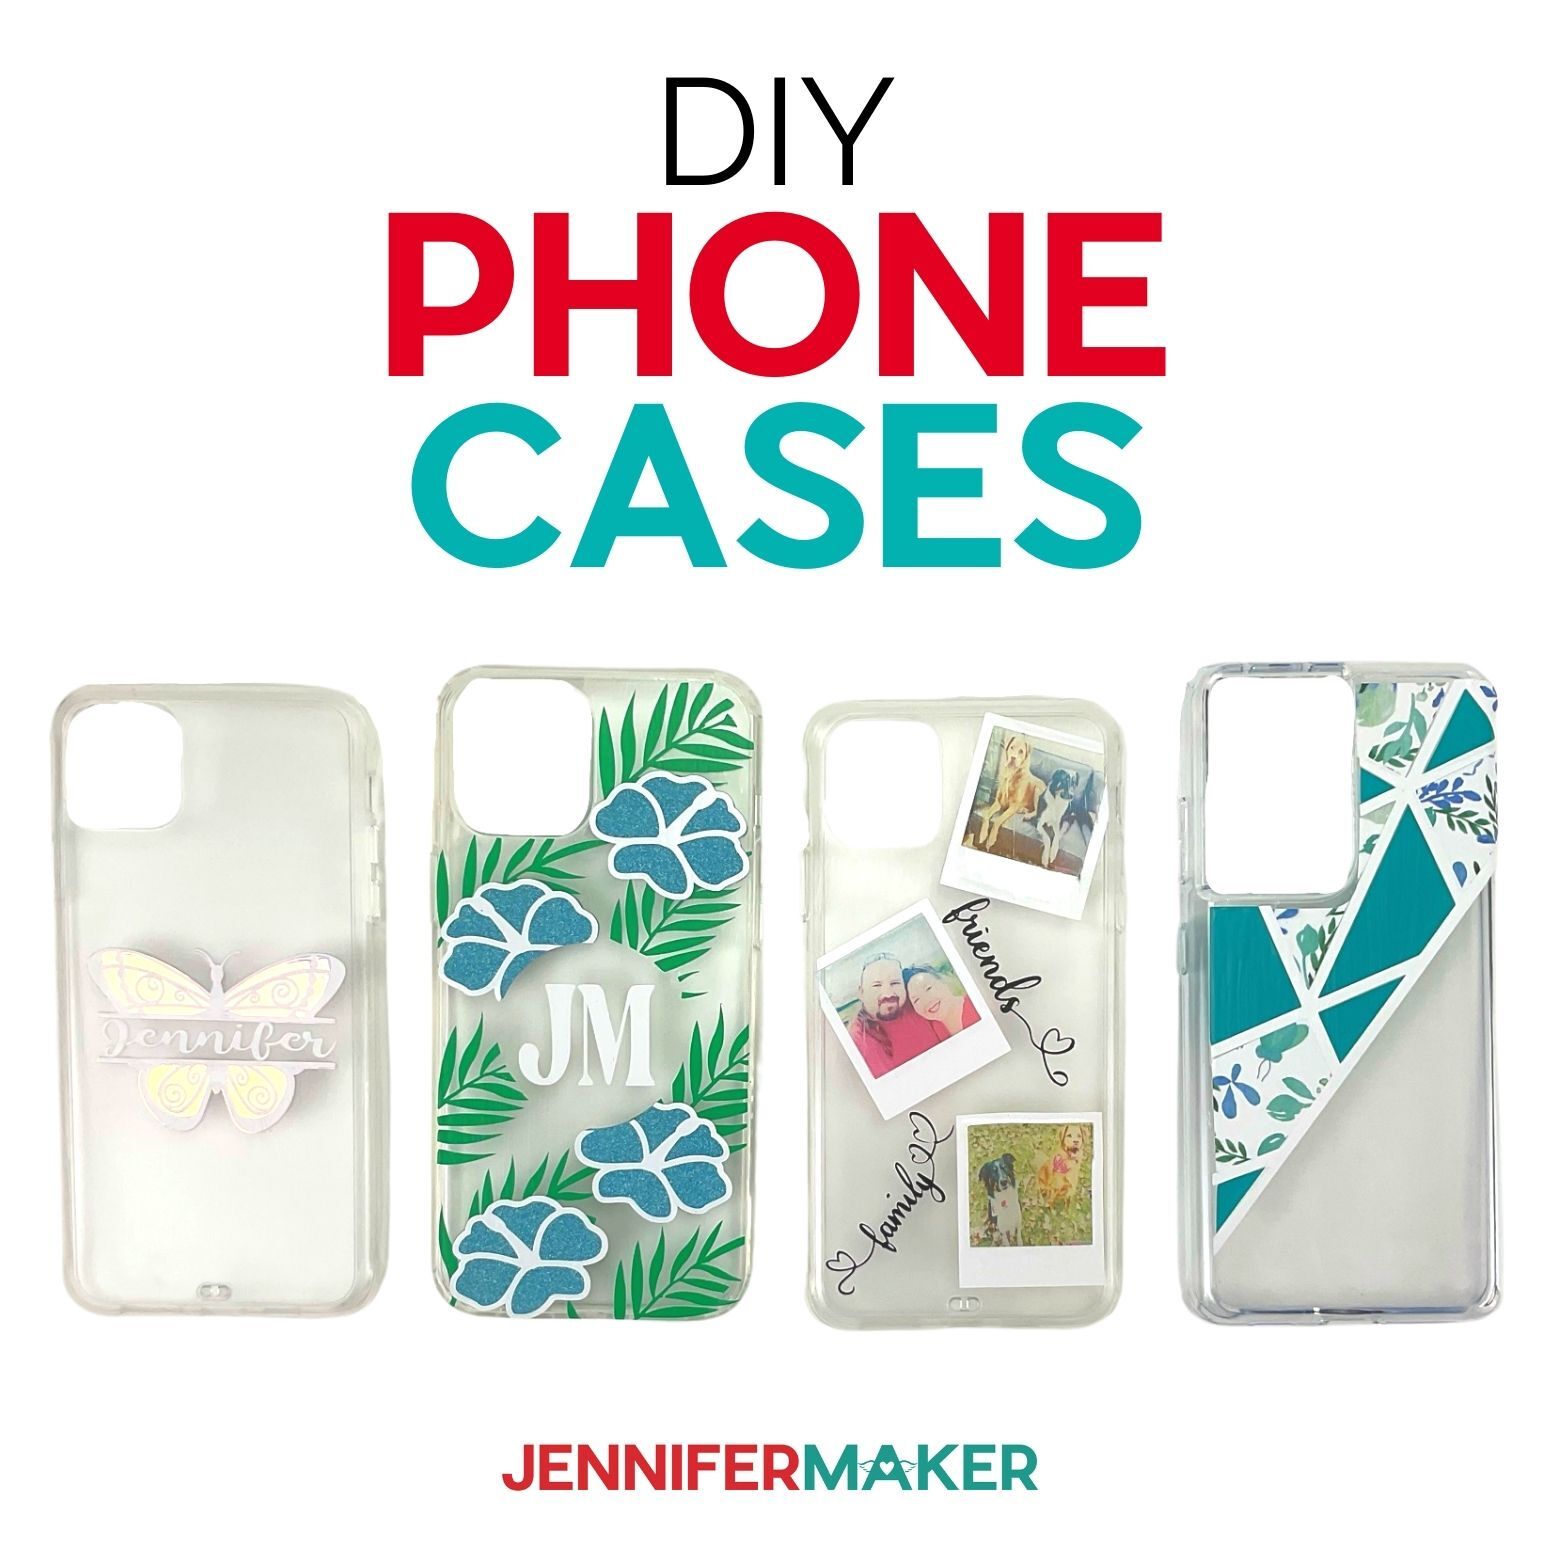 DIY Phone Cases: Personalize With Vinyl!